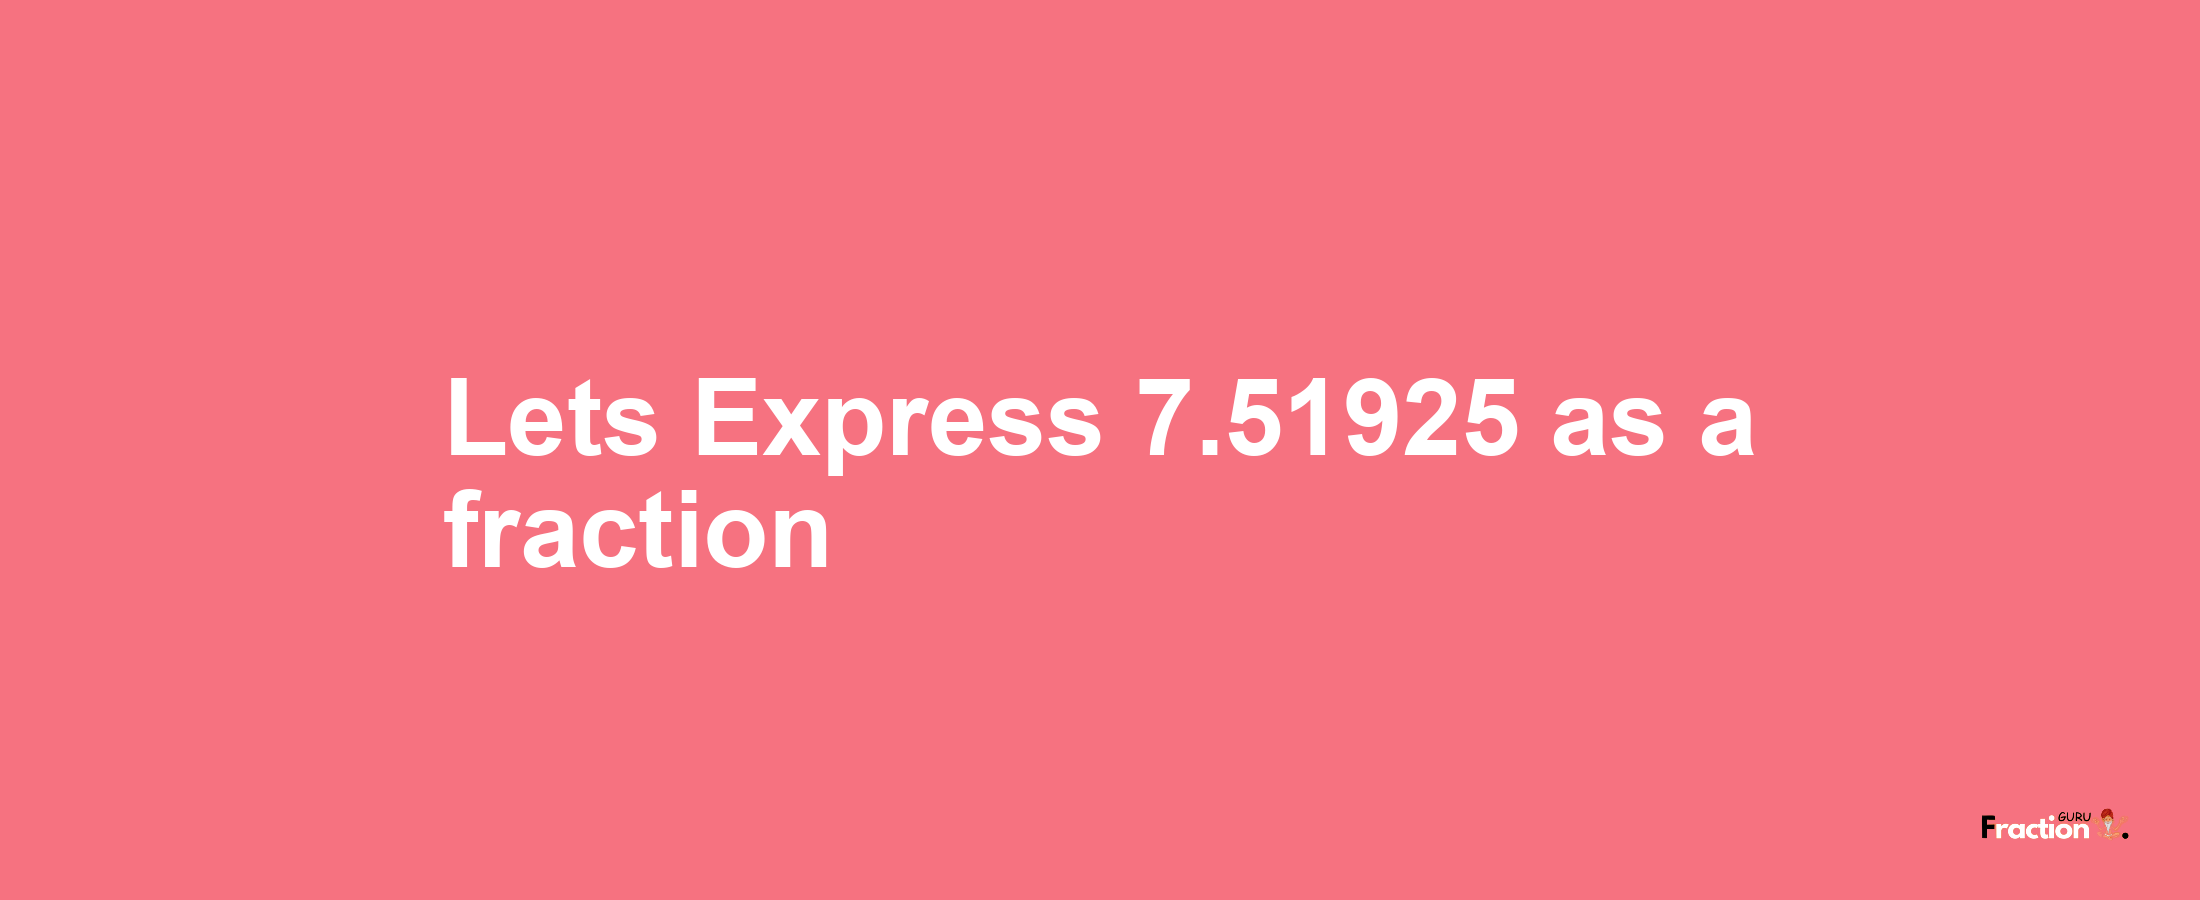 Lets Express 7.51925 as afraction